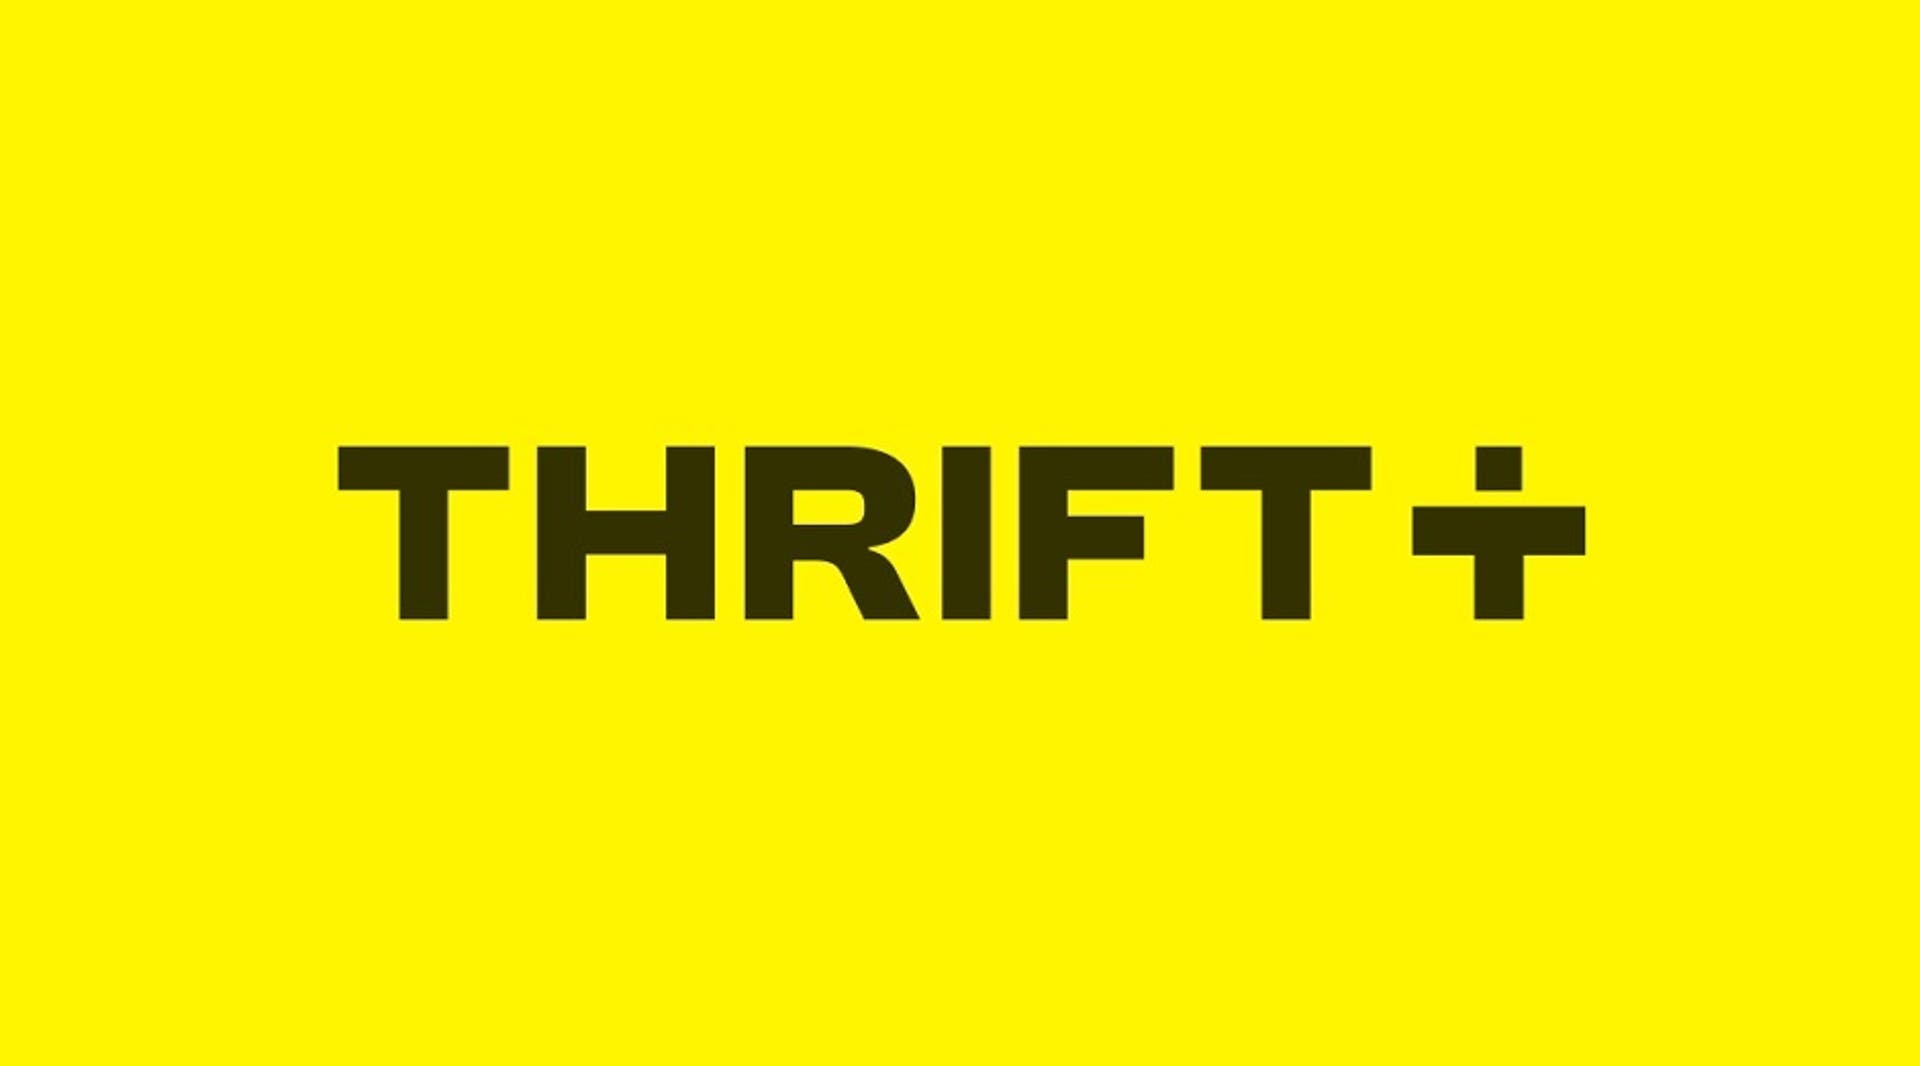  The Thrift+ logo in black on a yellow background. 